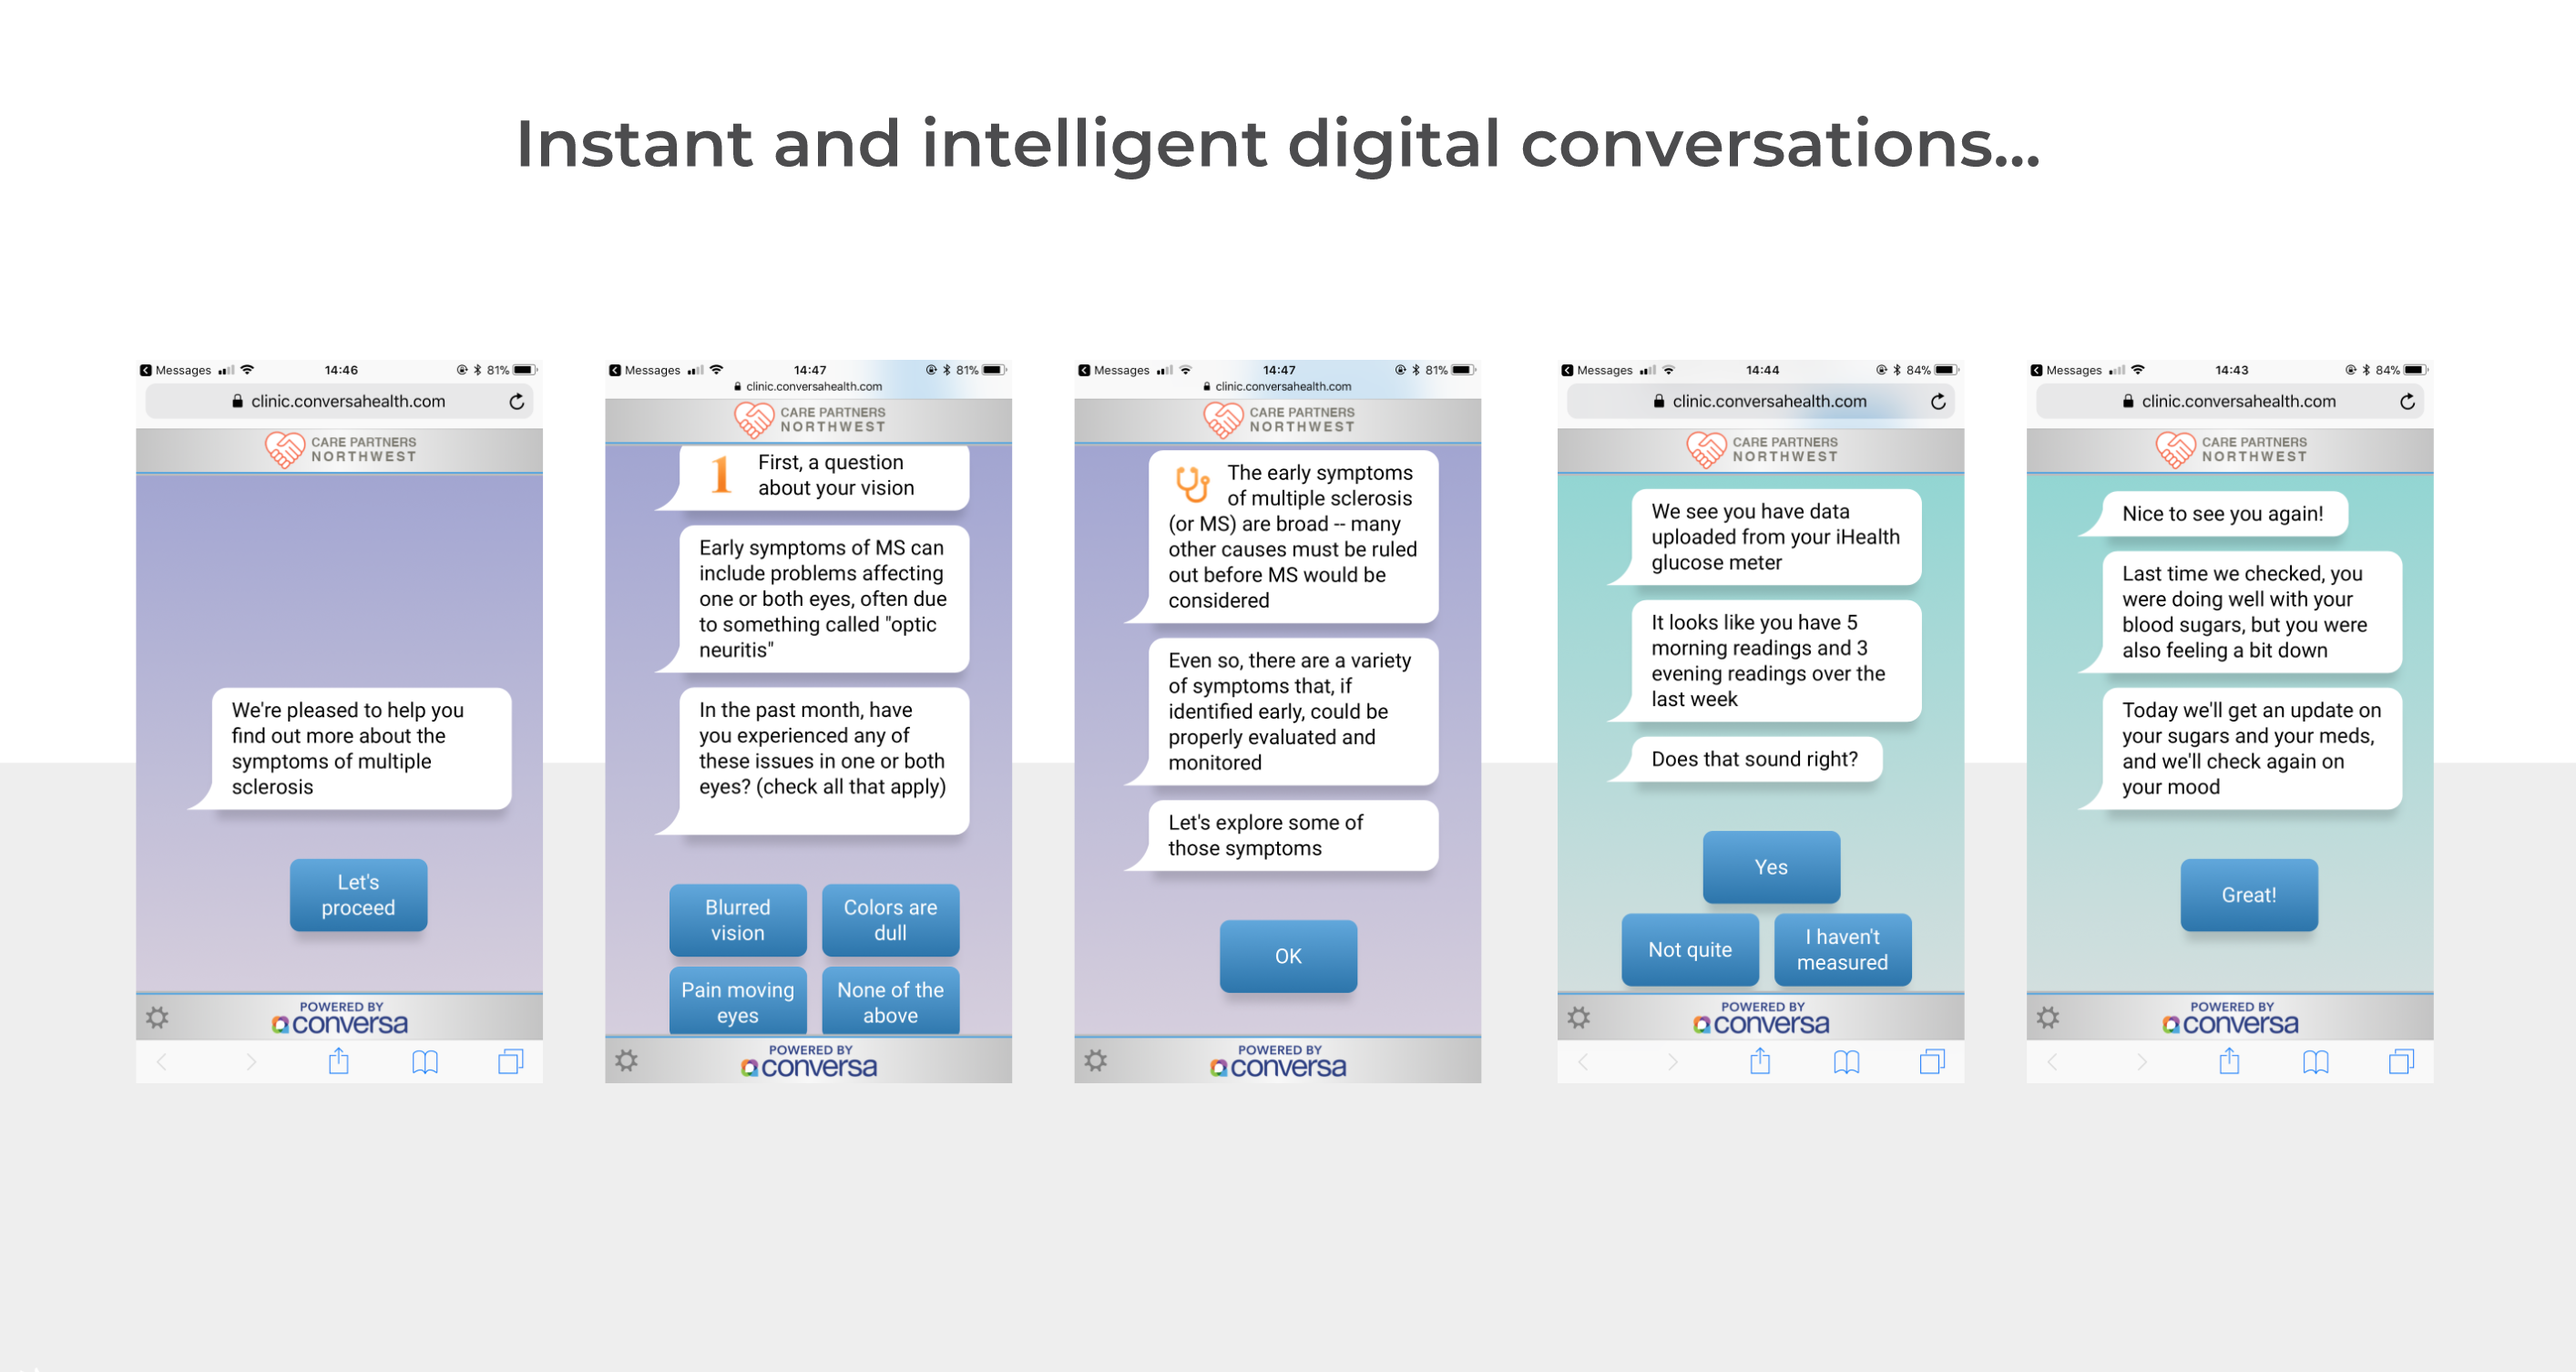 Conversa's chat tool helps a patient research symptoms